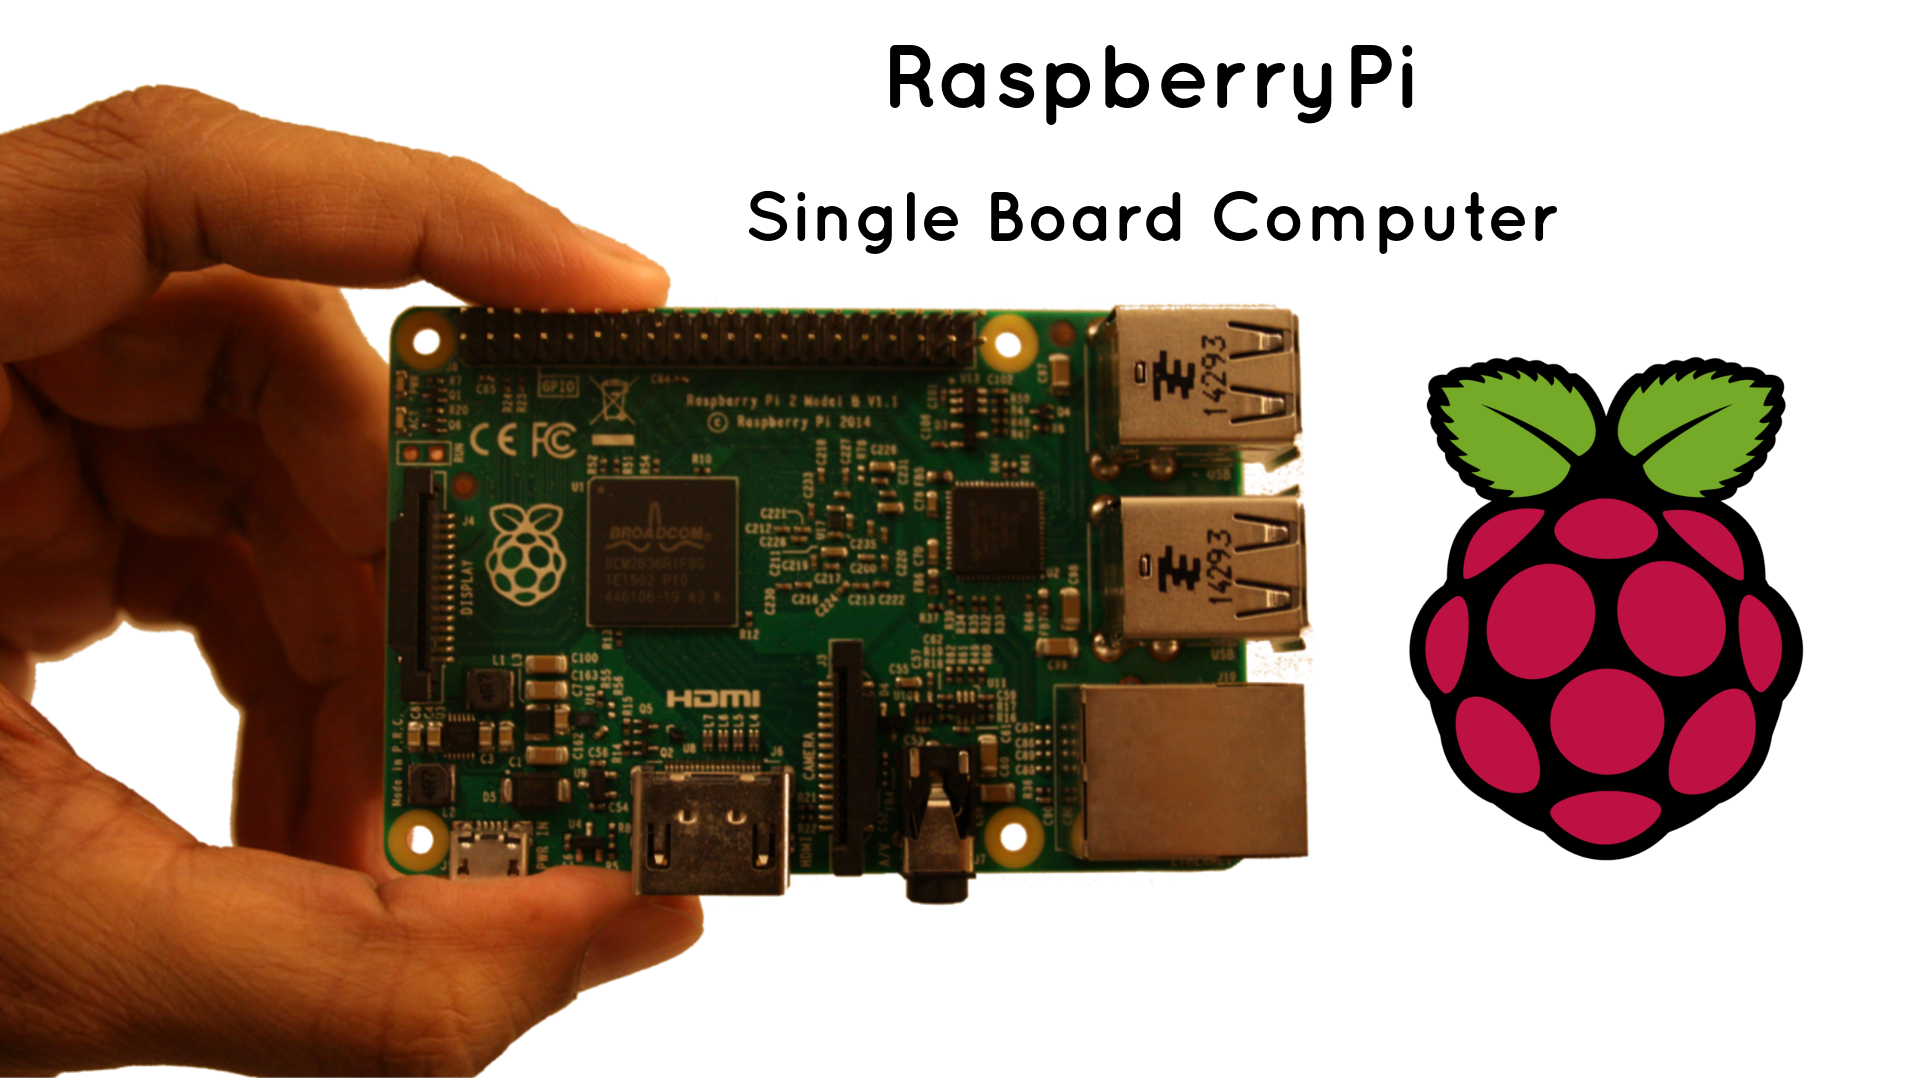 Introduction to RaspberryPi